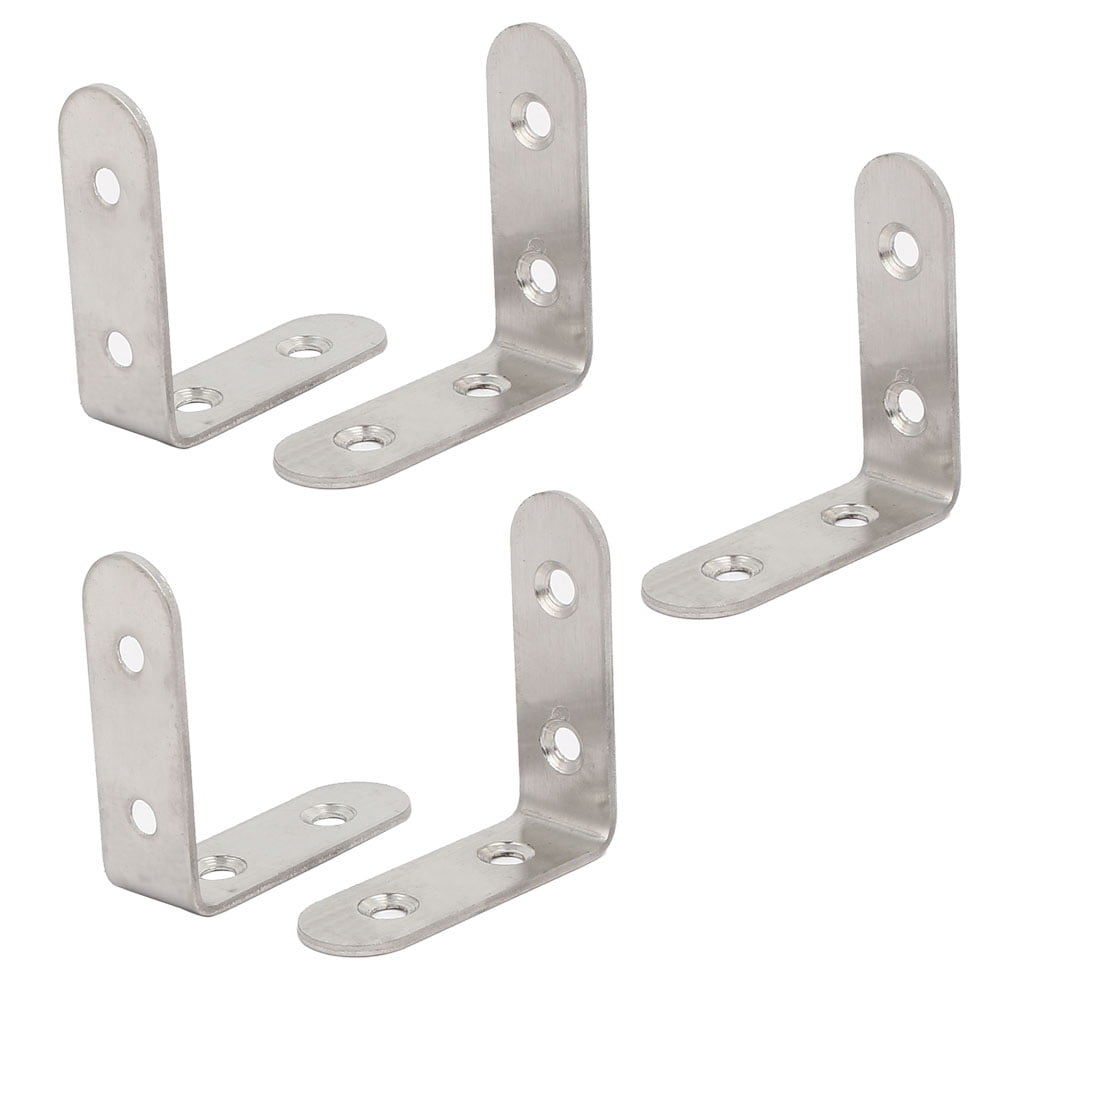 50mmx50mmx2mm Stainless Steel L Shaped Angle Brackets Shelf Supports ...